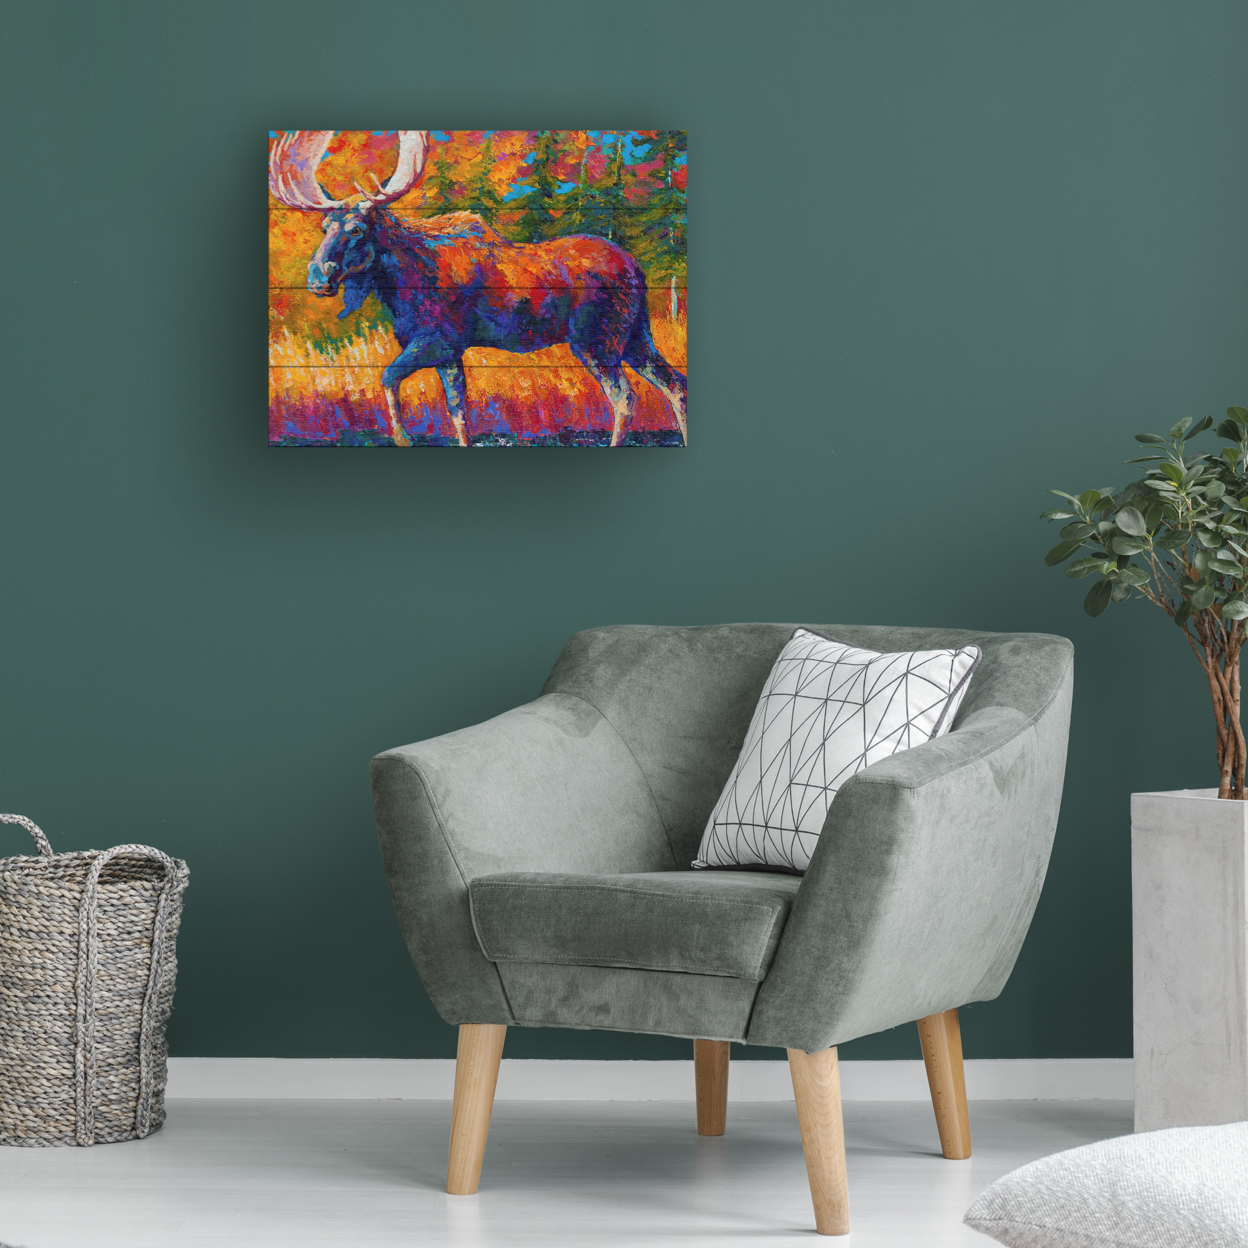 Wall Art 12 X 16 Inches Titled Moose Encounter Ready To Hang Printed On Wooden Planks